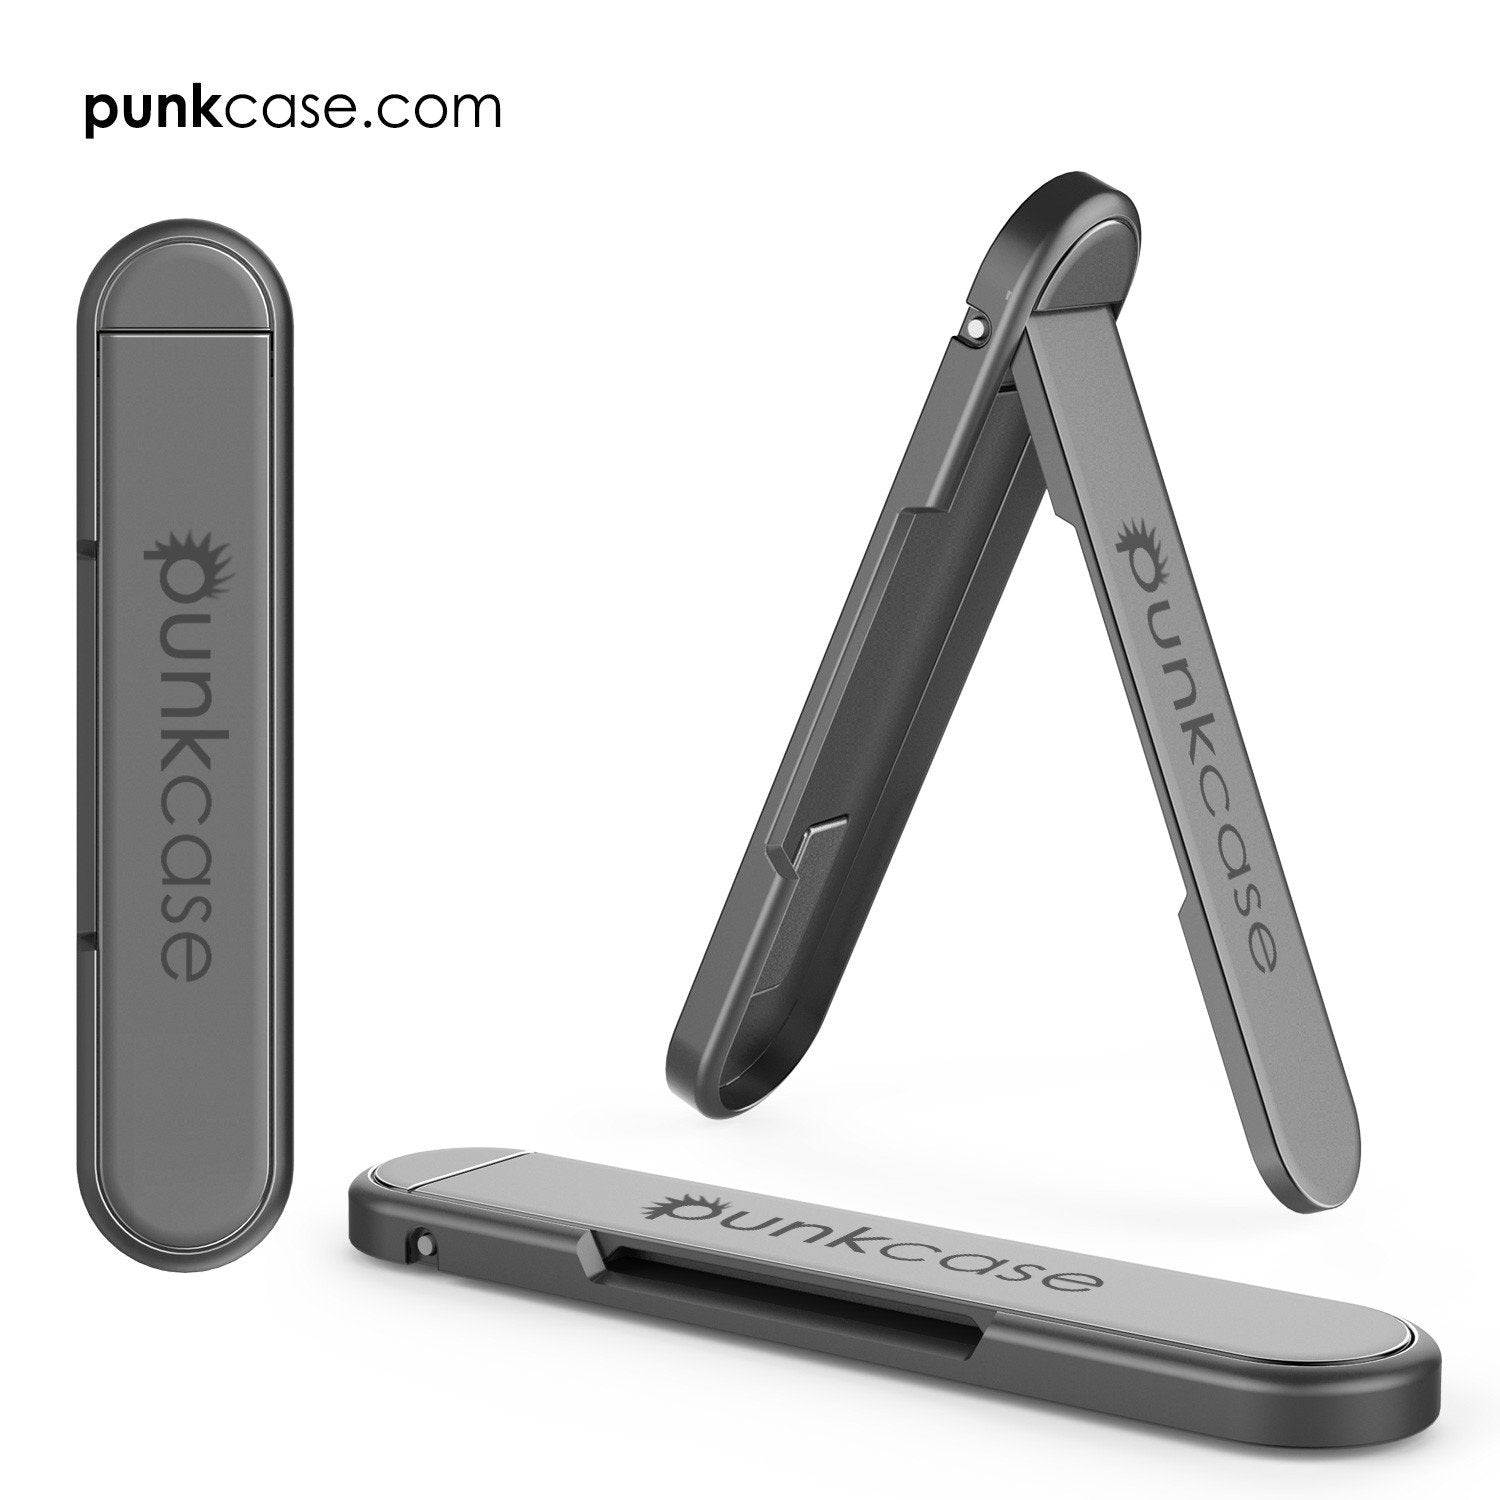 PUNKCASE FlickStick Universal Cell Phone Kickstand for all Mobile Phones & Cases with Flat Backs, One Finger Operation (Charcoal) - PunkCase NZ